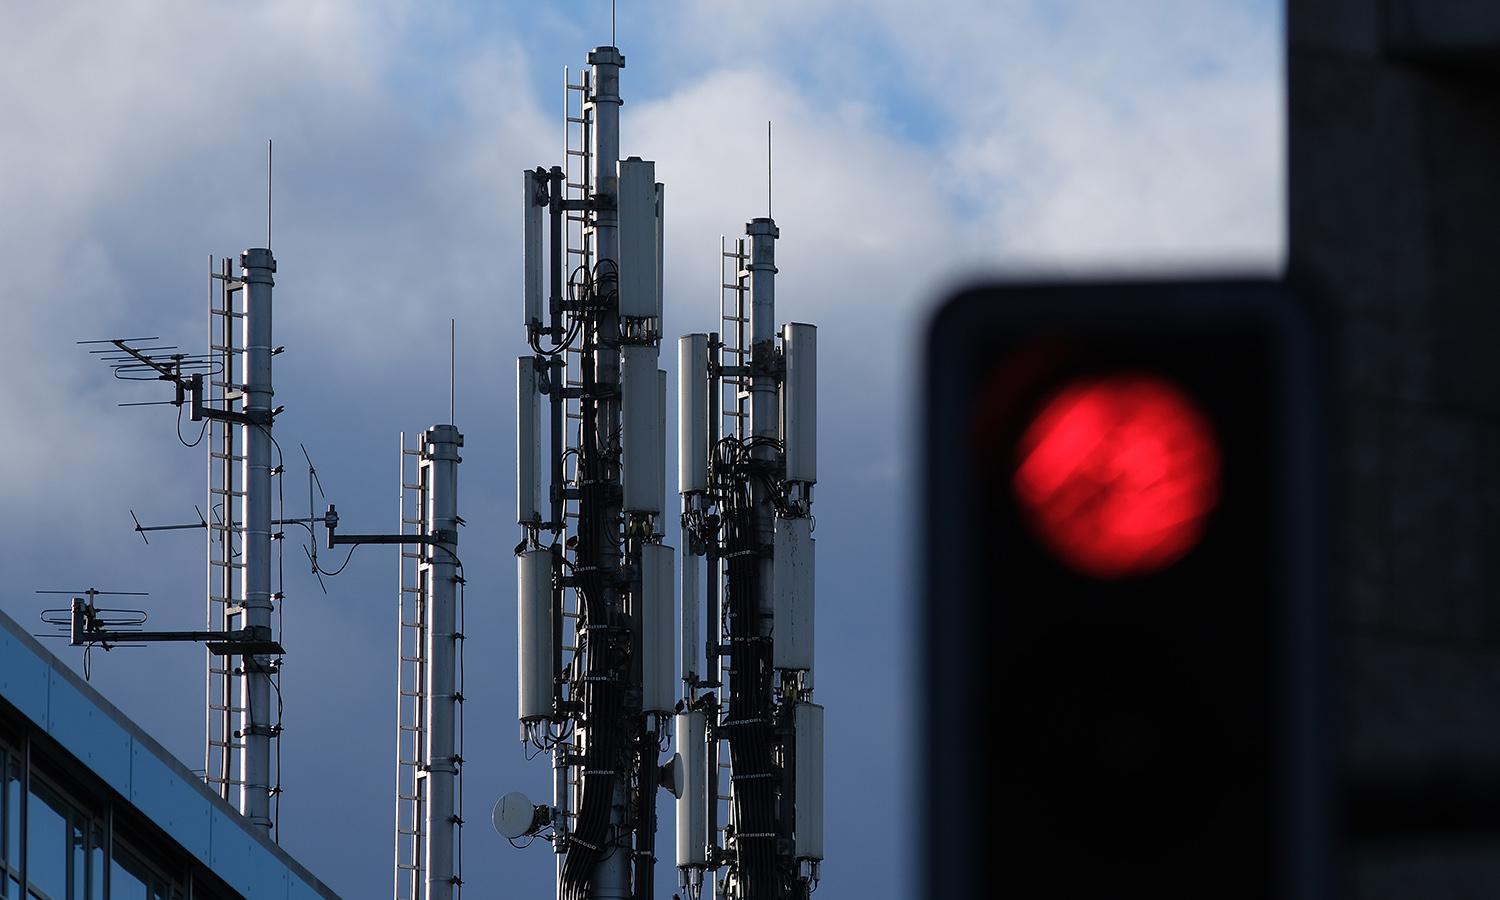 A traffic light shows red under a cellular phone tower that stands on top of an office building on Jan. 2, 2019, in Berlin. (Photo by Sean Gallup/Getty Images)